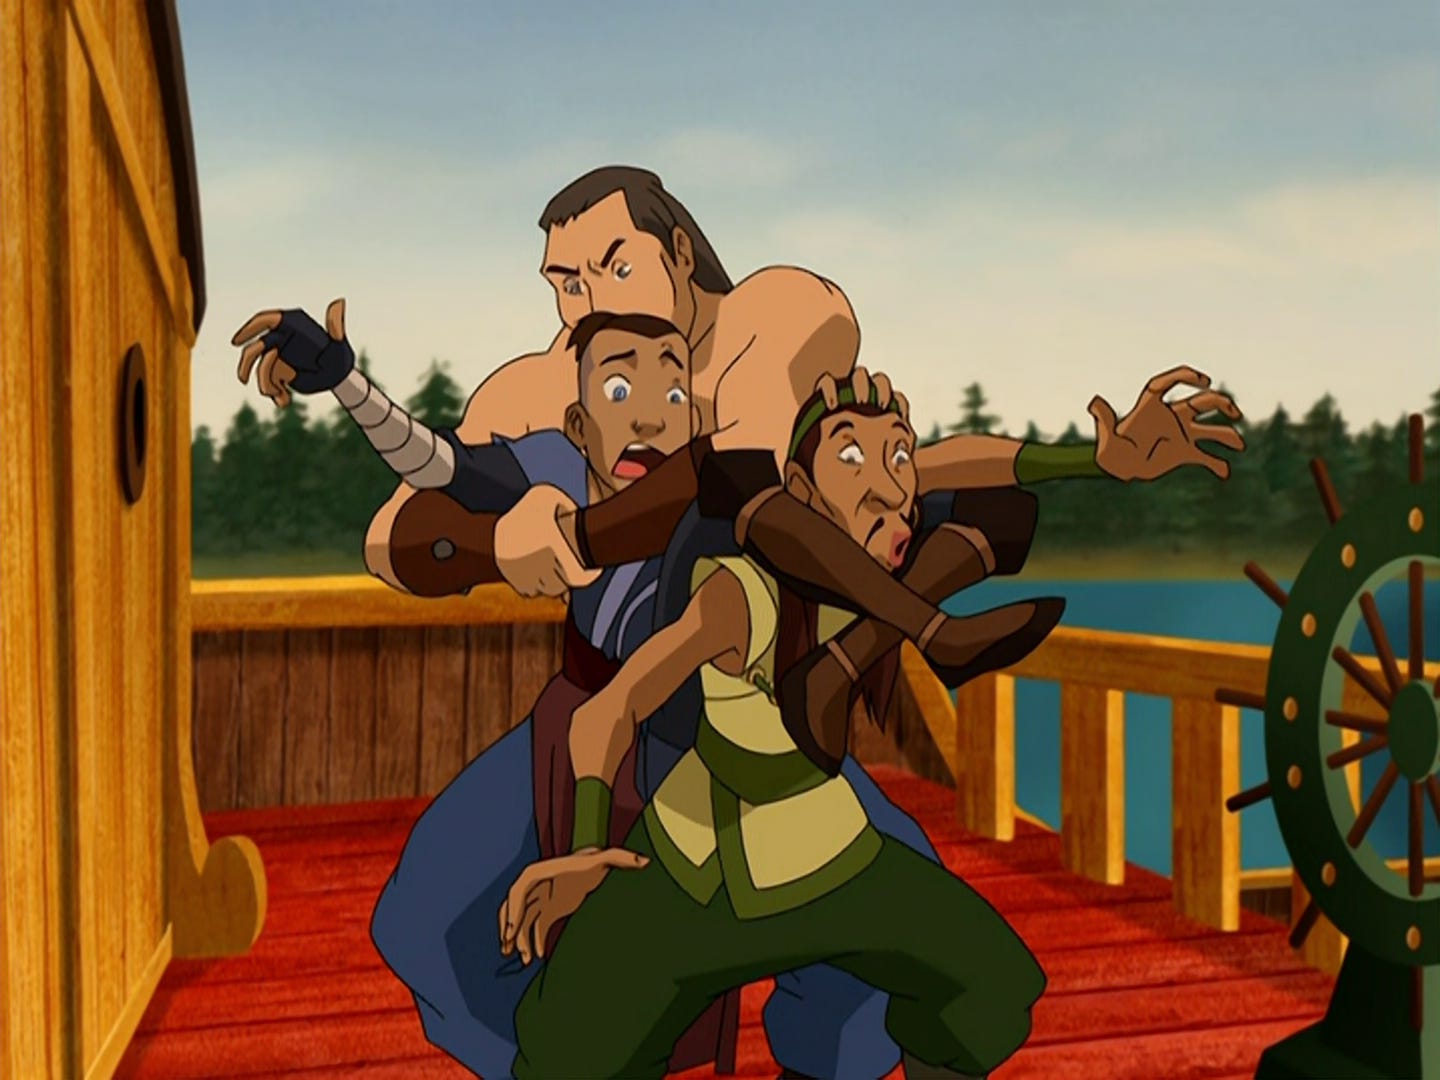 On the deck of a boat, Sokka wrestles with two pirates. Everyone's limbs are entangled, and he's not doing so hot.